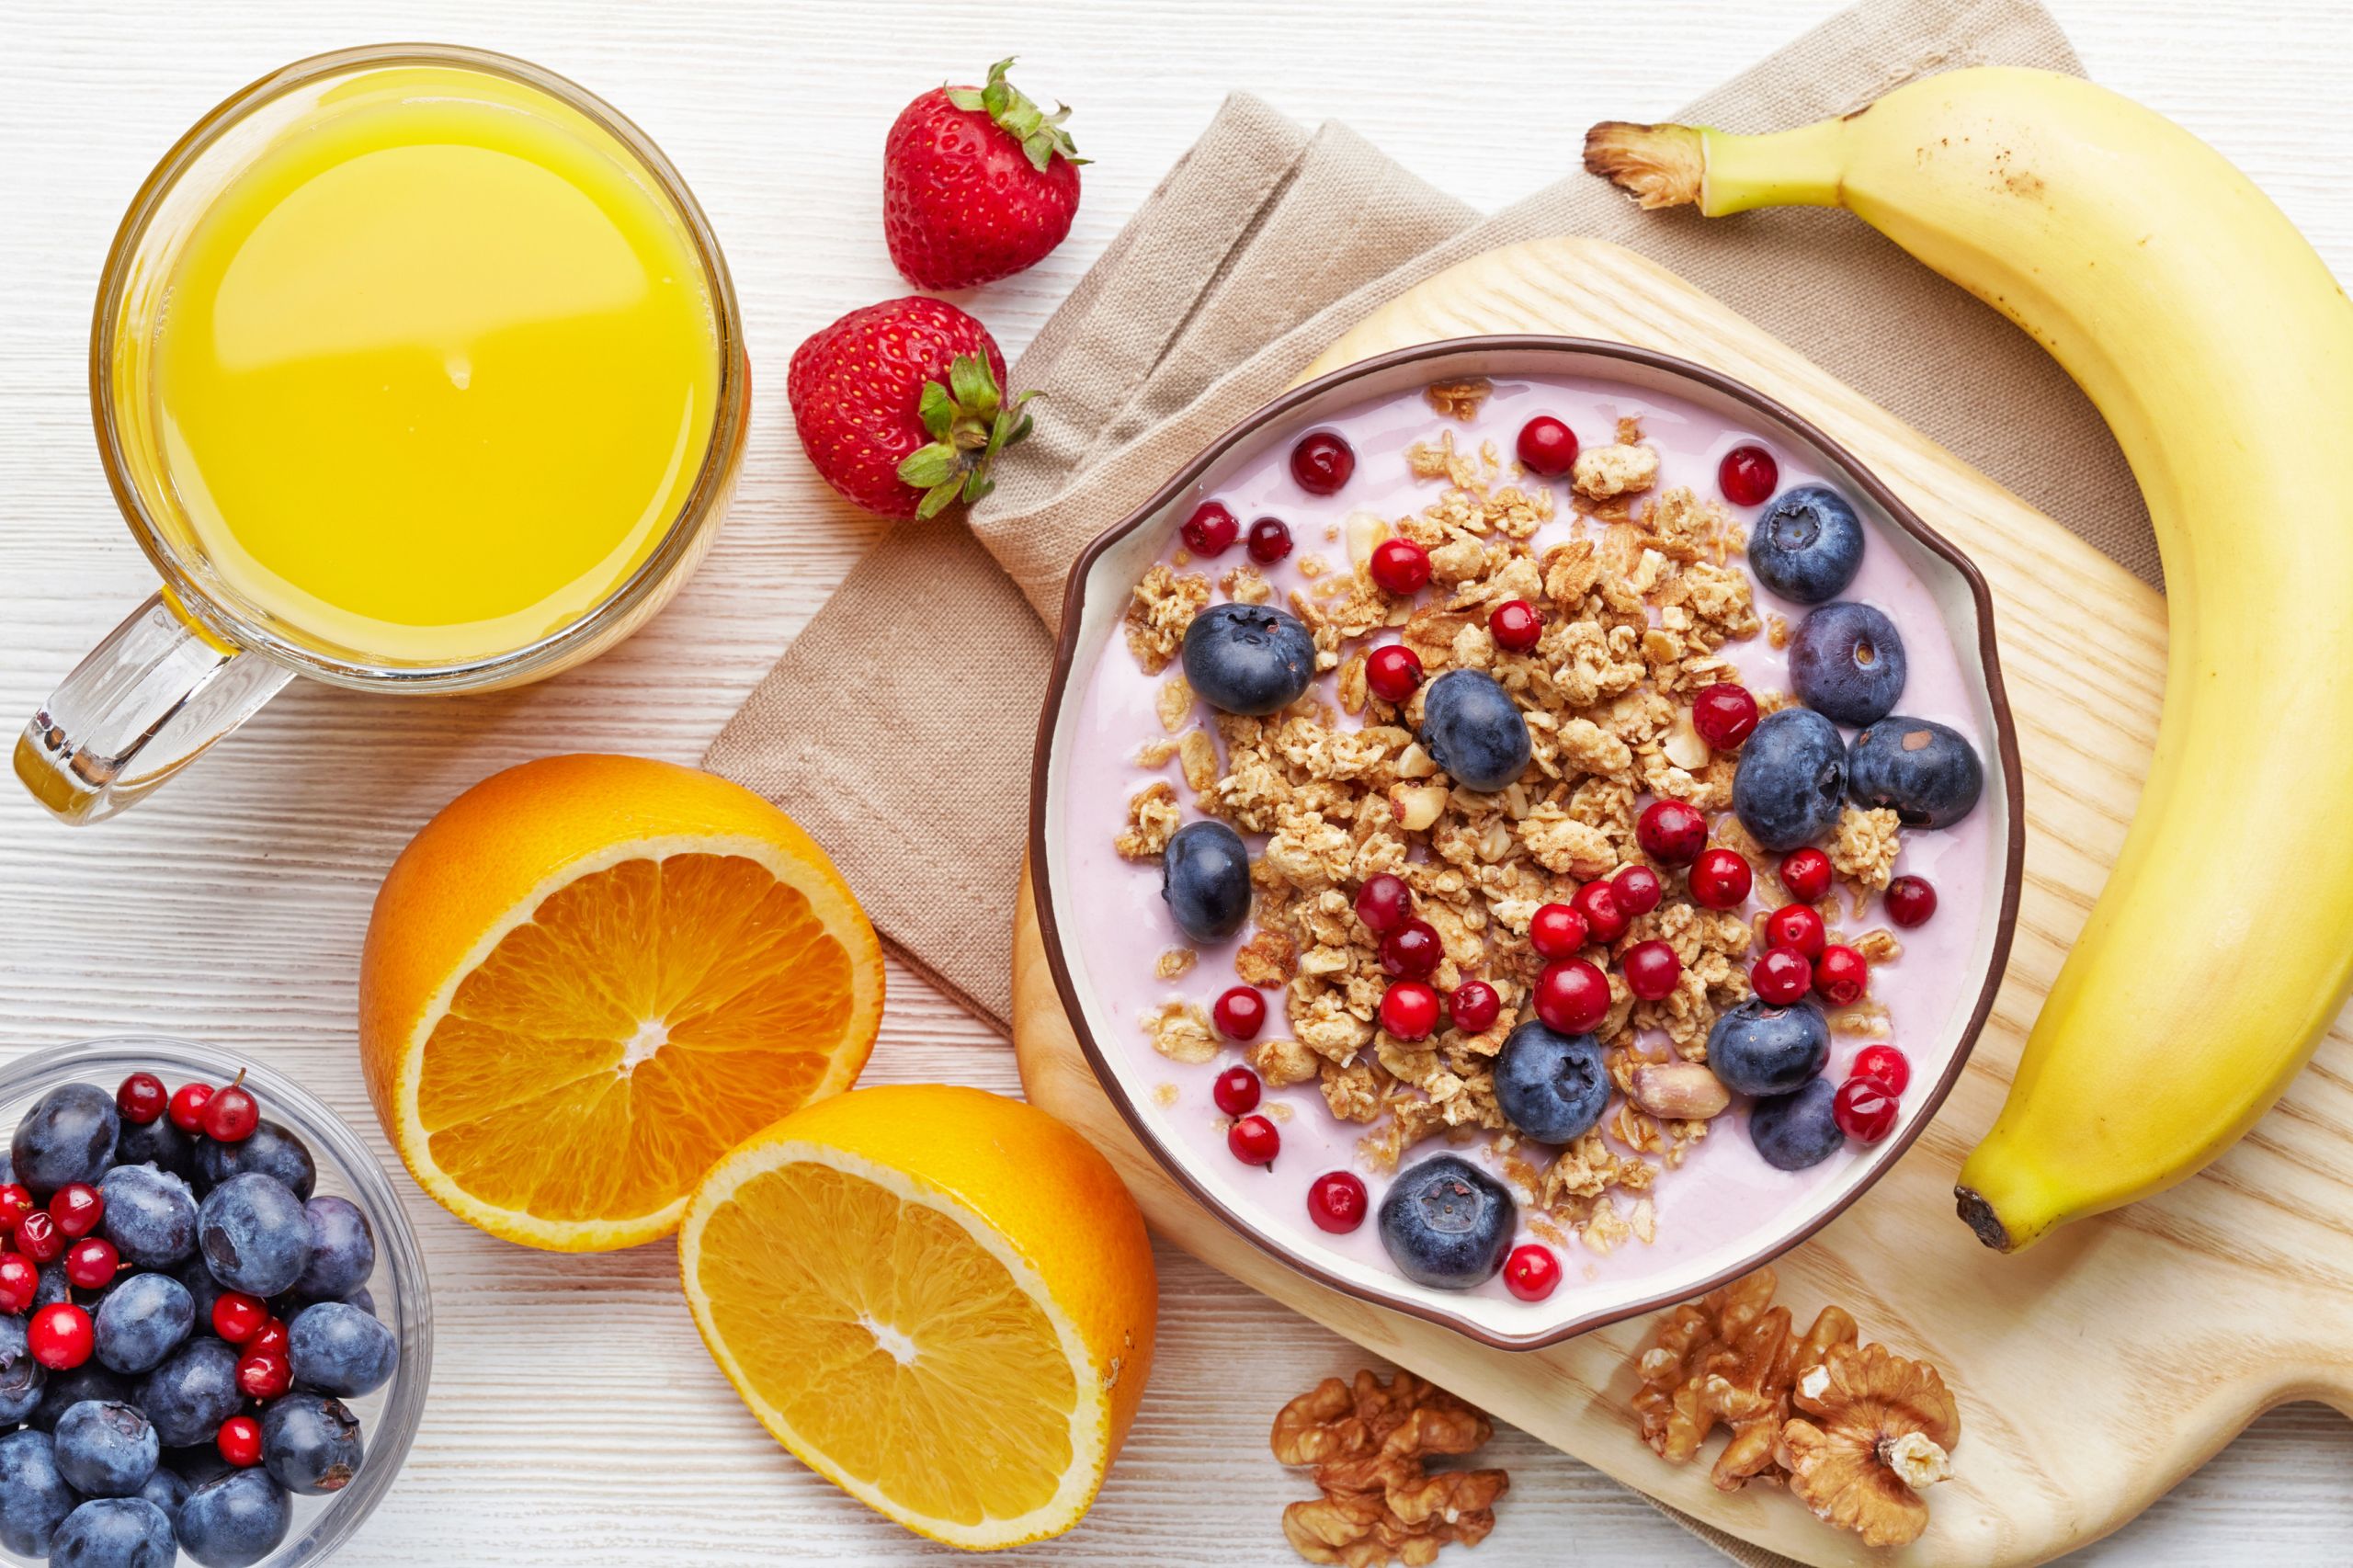 Healthy Breakfast Foods For Weight Loss
 6 Healthy Breakfast Ideas for Weight Loss